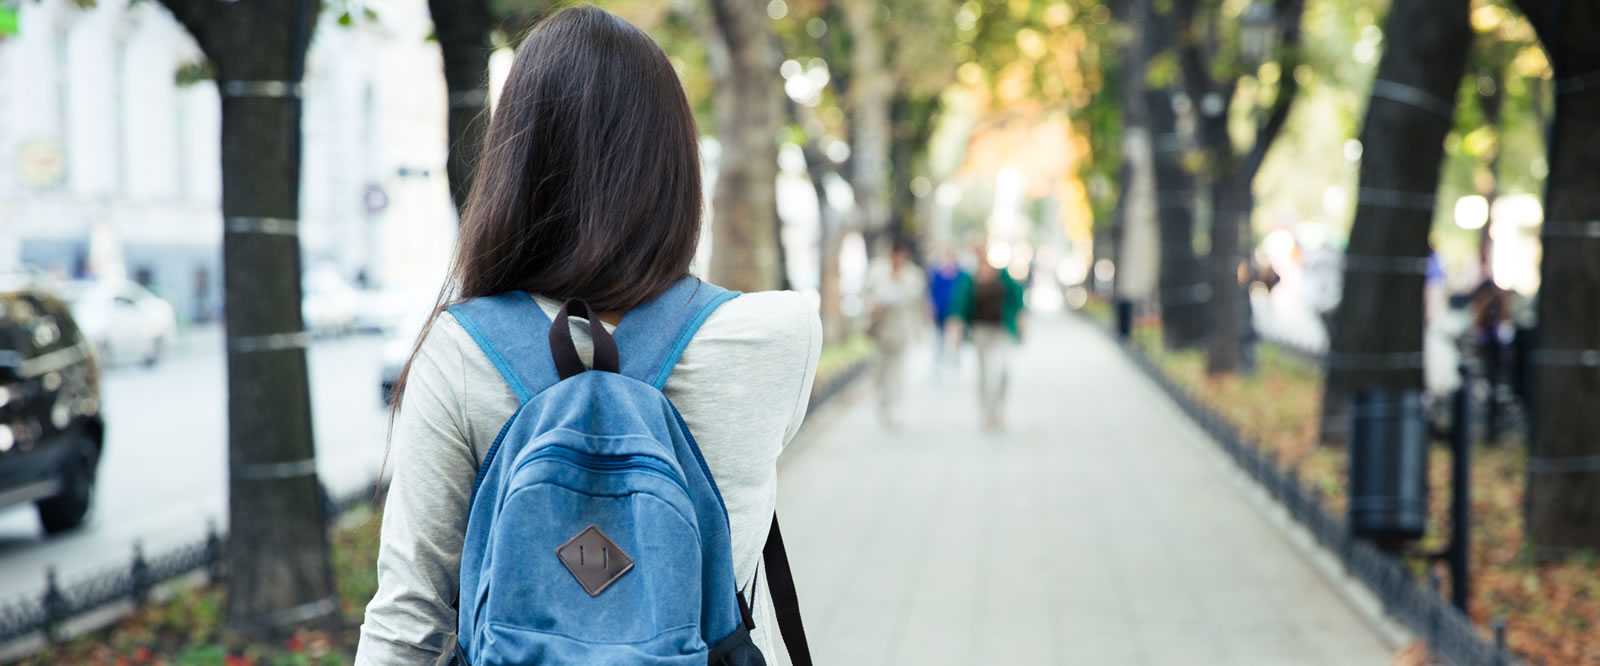 Image of a college student walking away from the camera